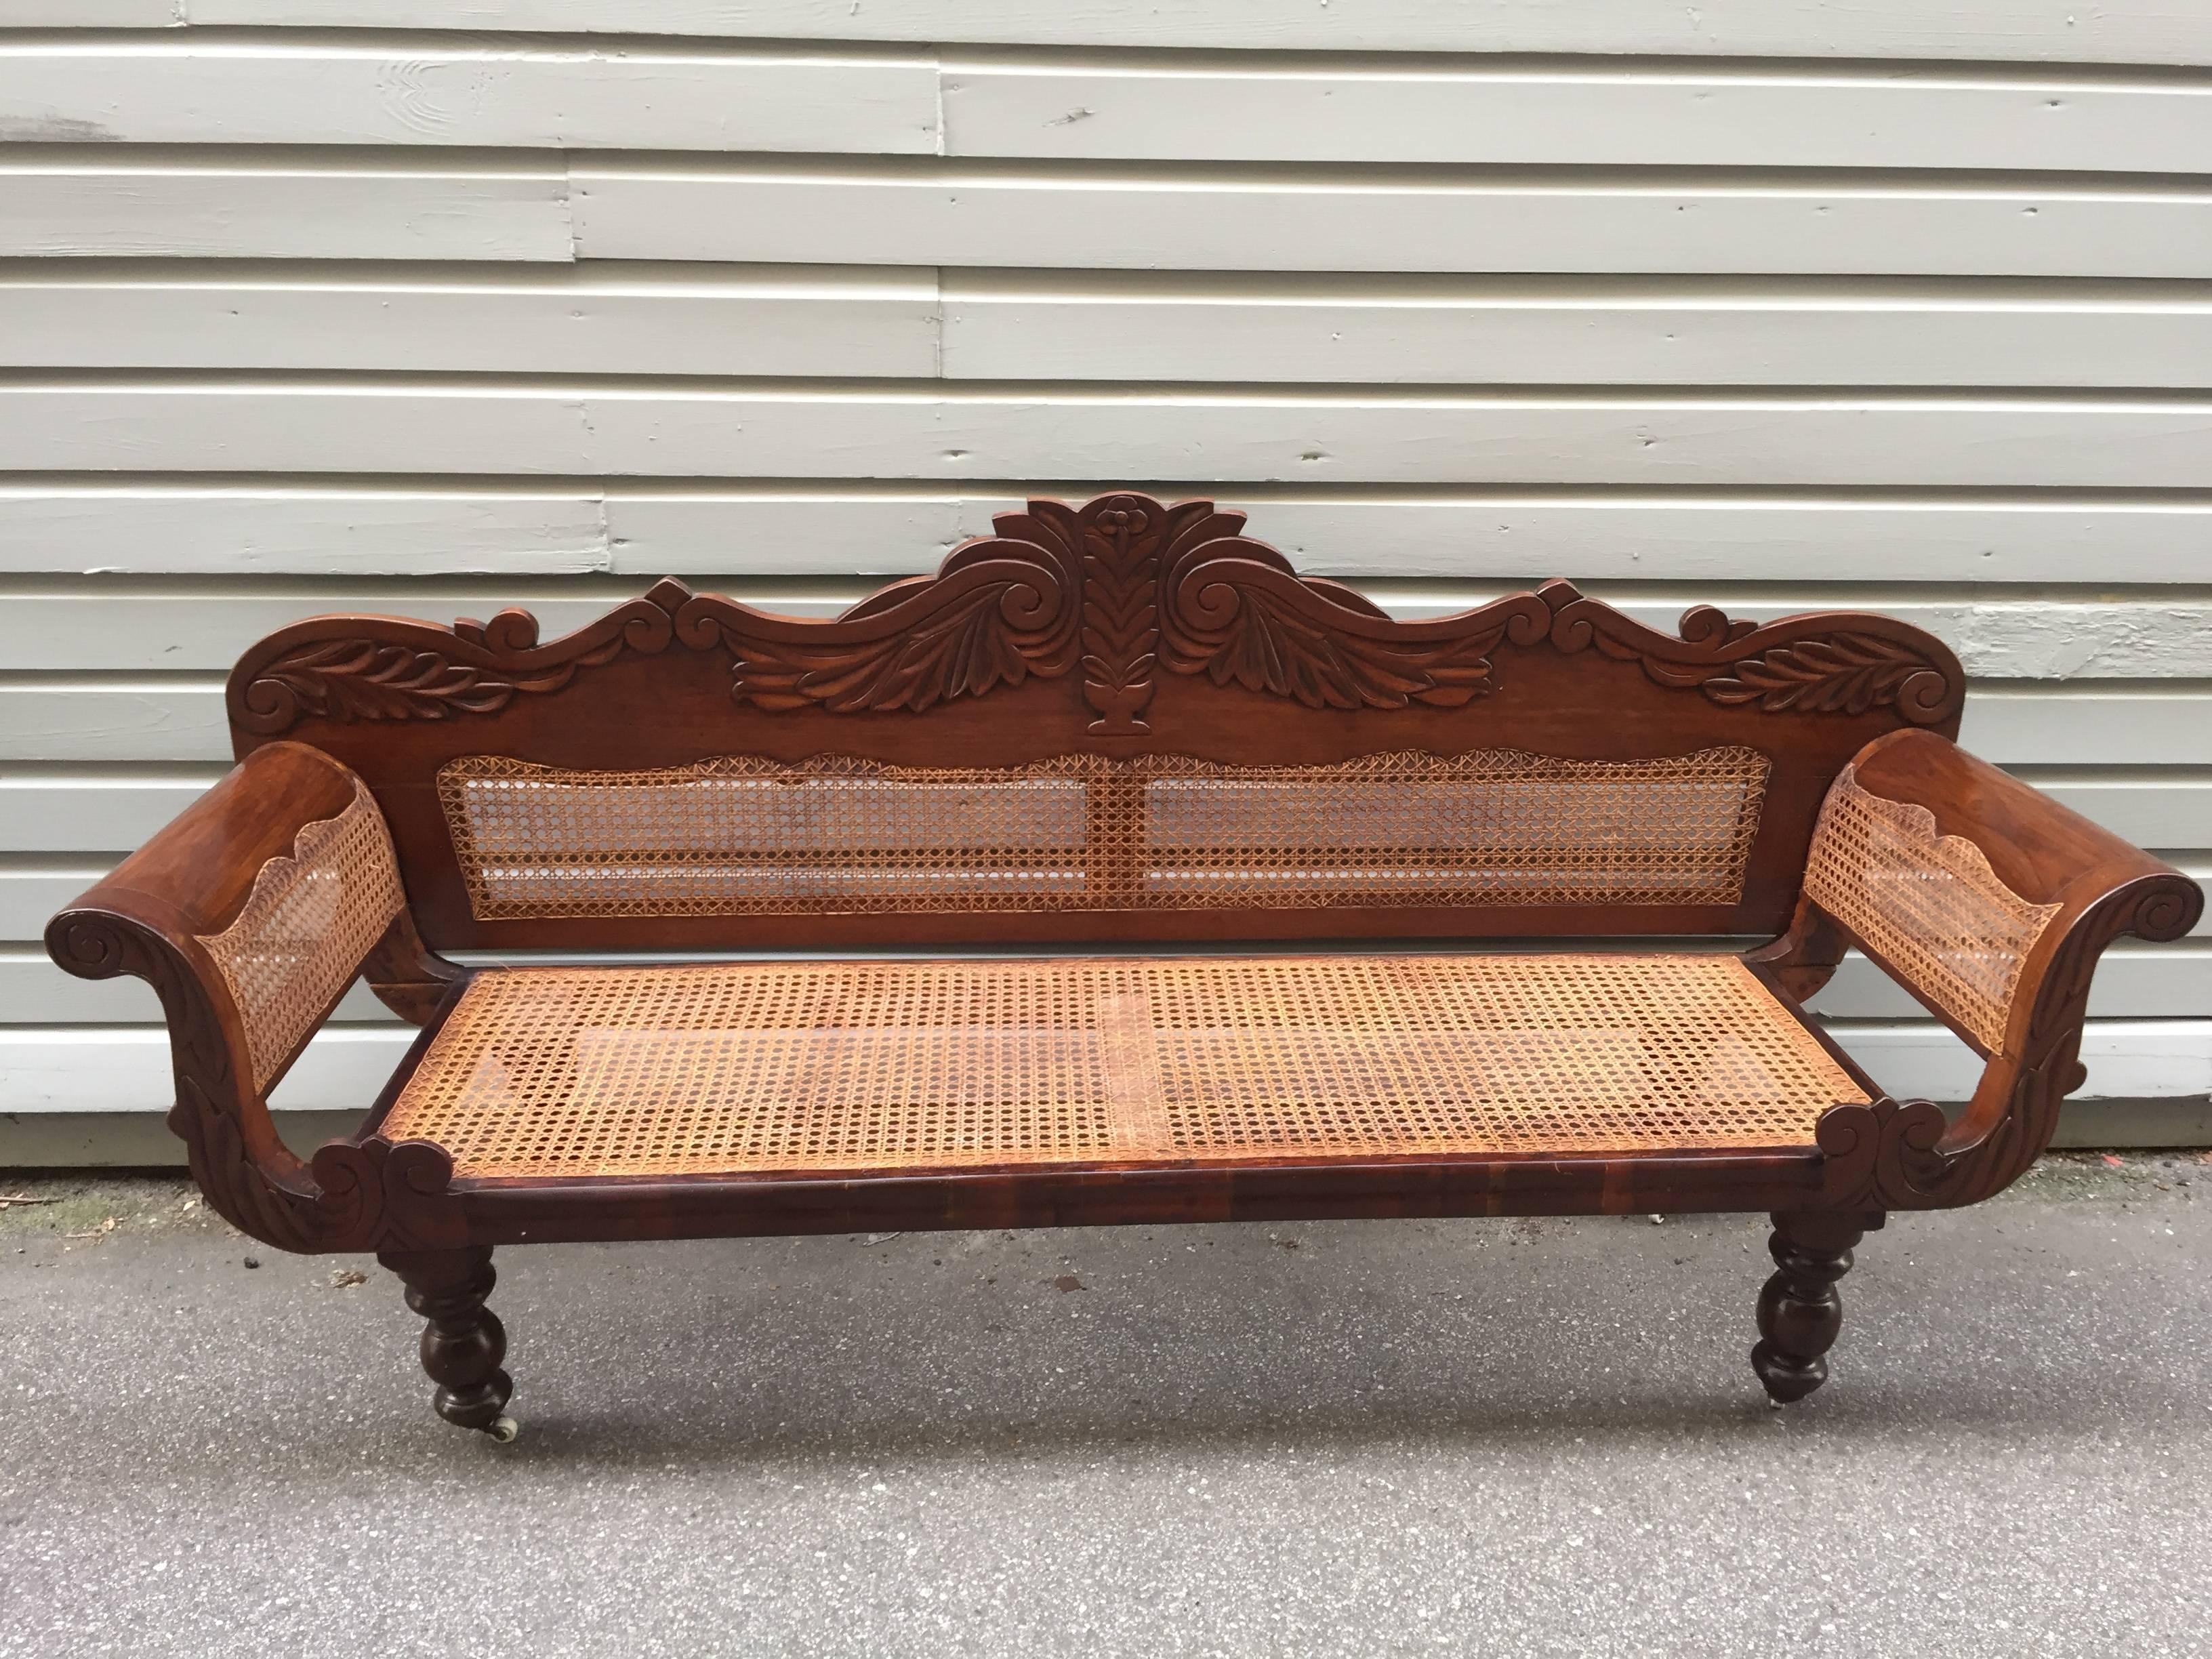 A circa 1830 cedrela settee from the West Indies, probably either Barbados or Jamaican in origin, featuring a rare and elaborate crest rail. The caned sides and back is serpentine. This piece is unusual in that the back is carved from solid cedrela.